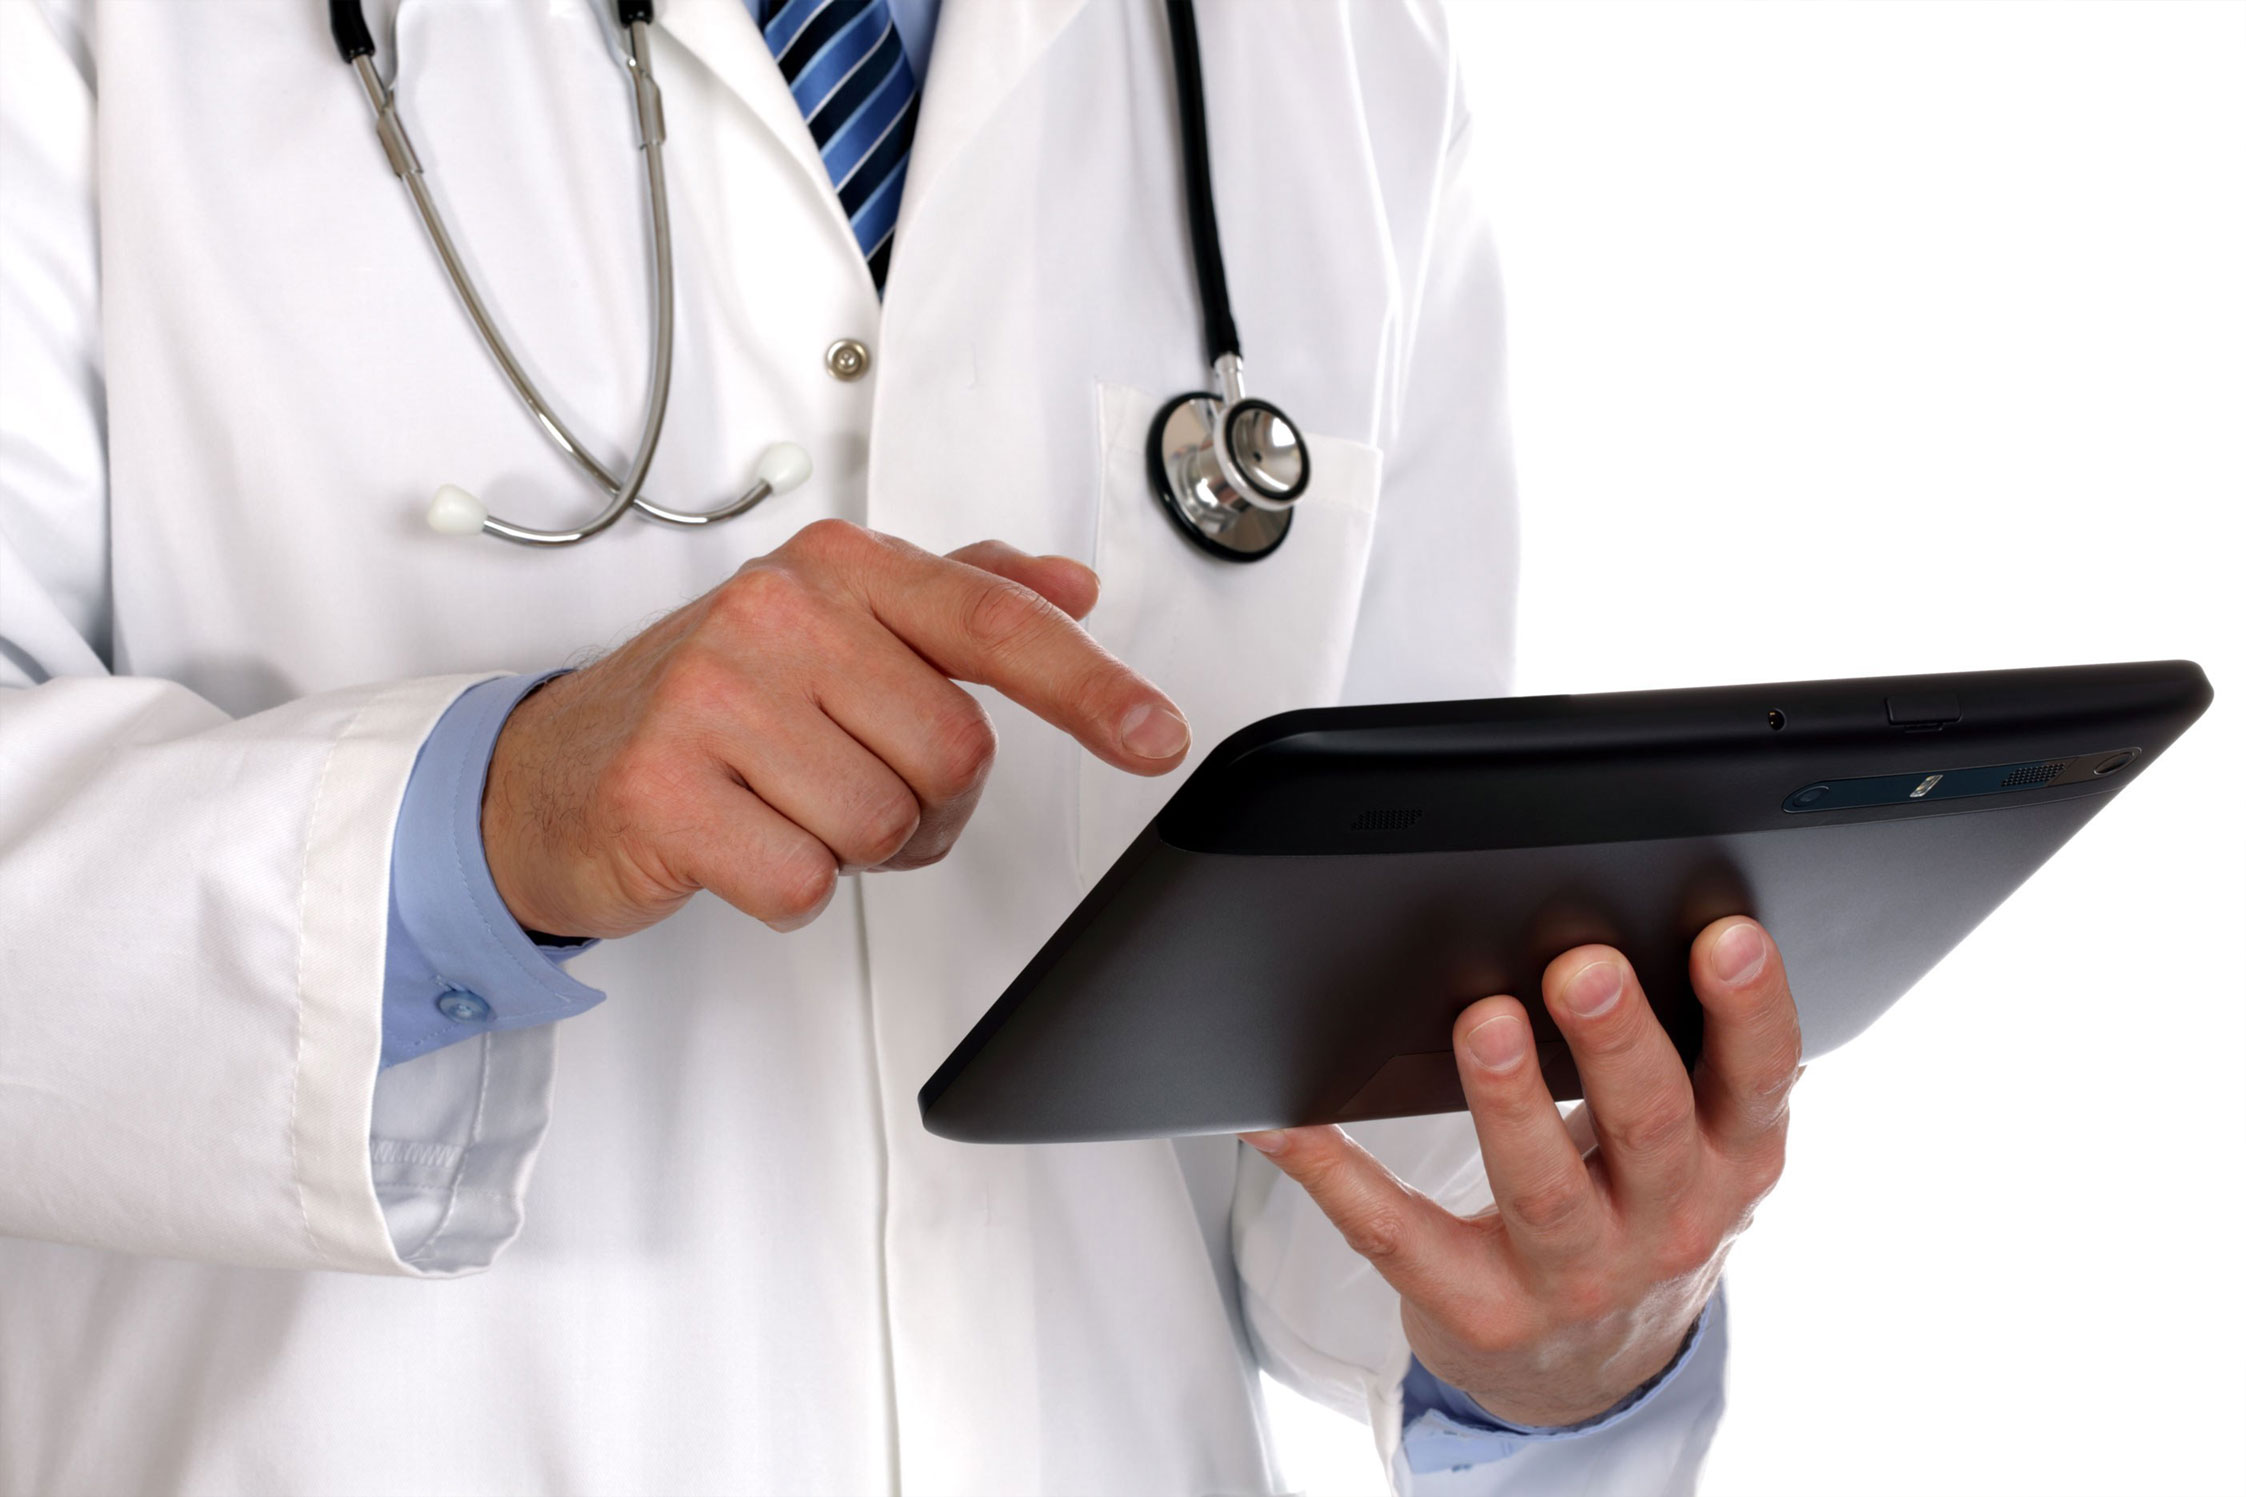 What Are The Disadvantages Of Electronic Medical Records?